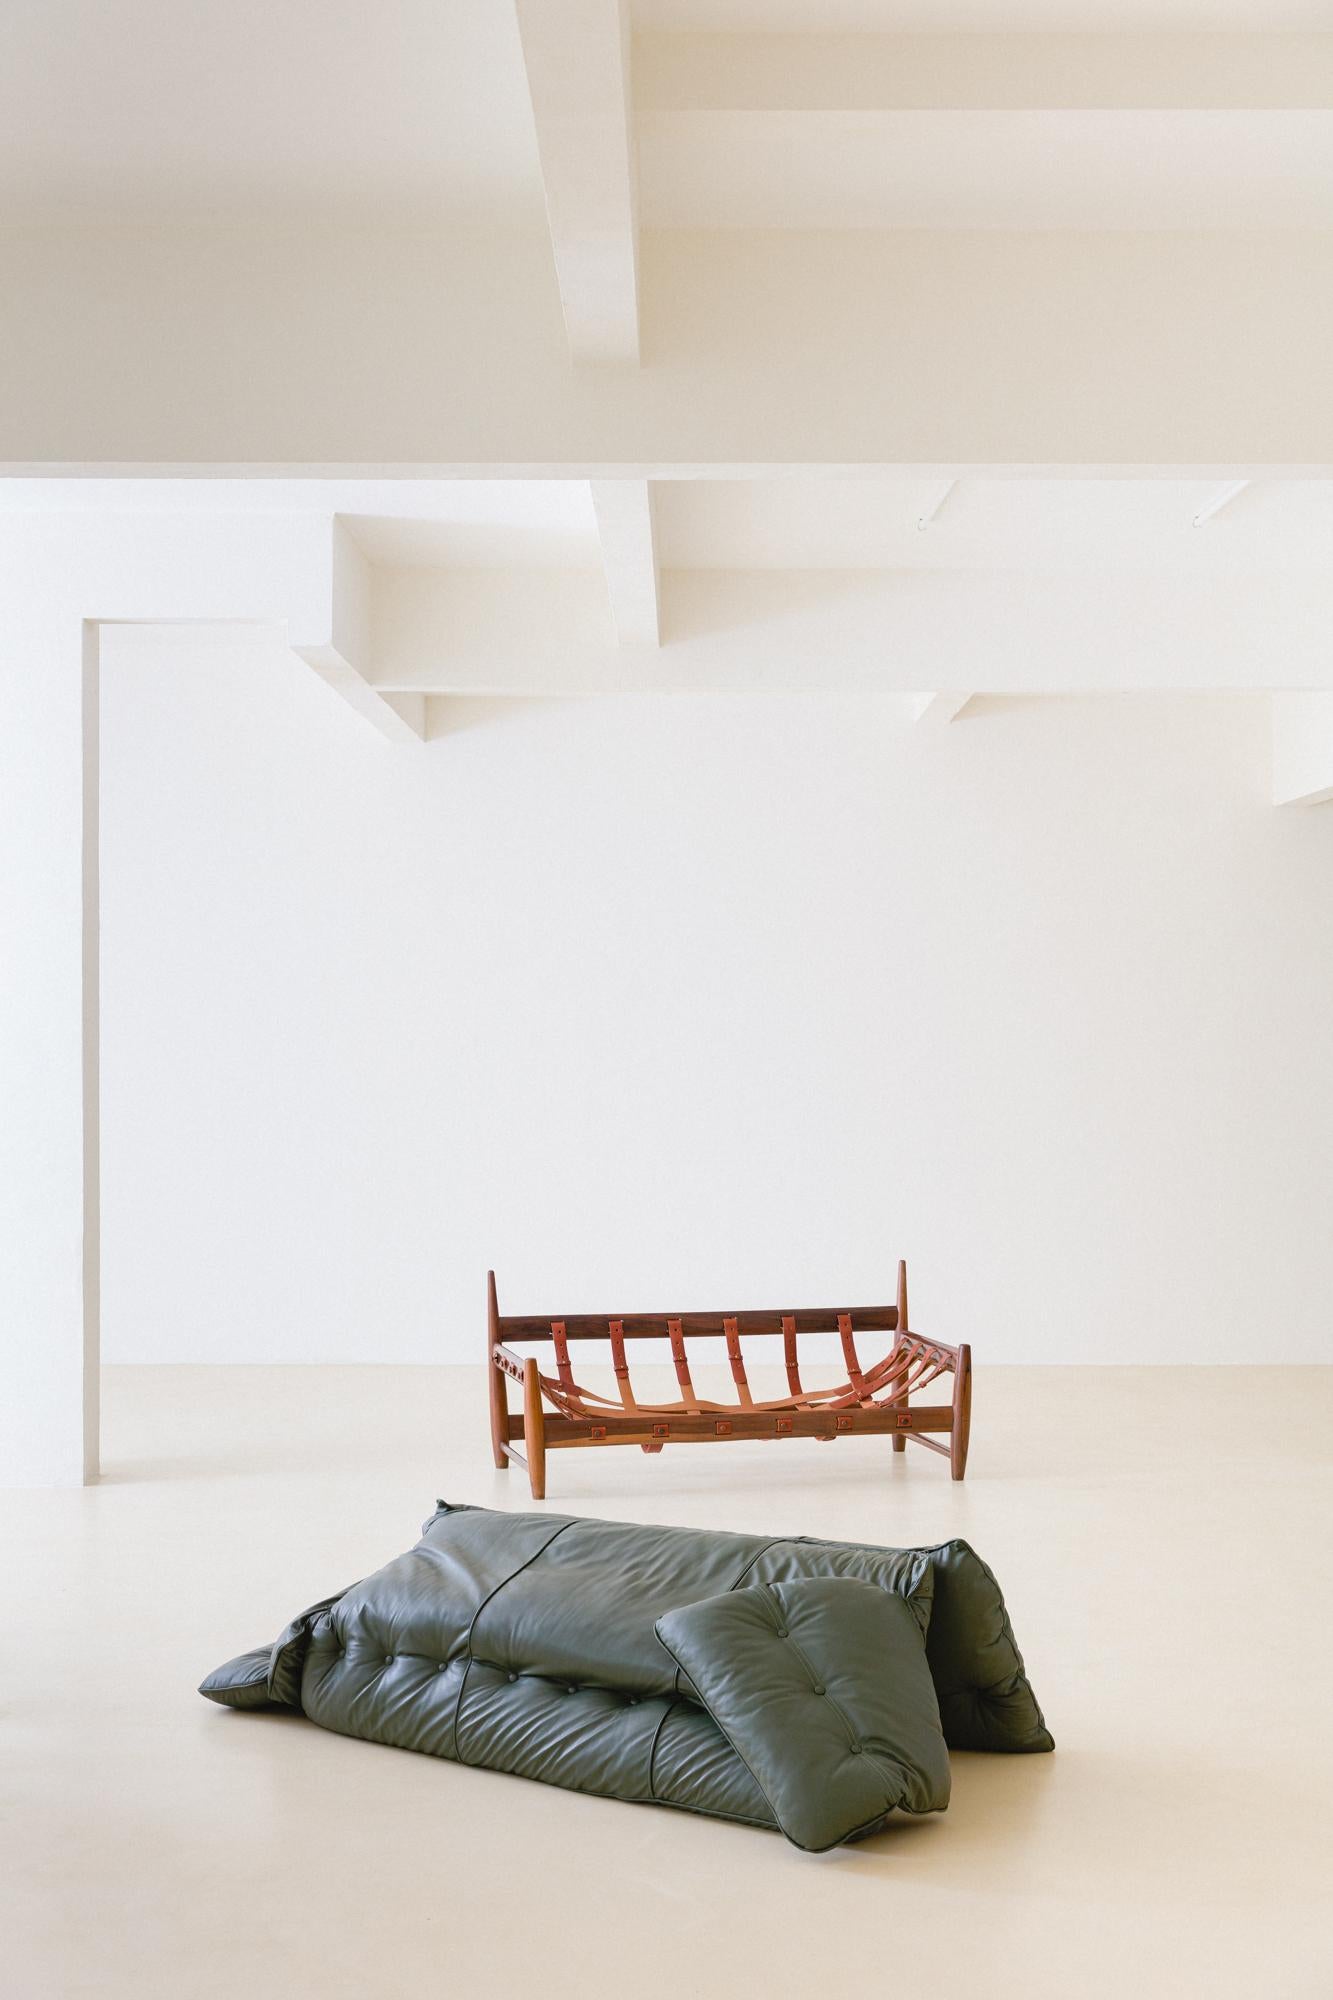 The iconic Mole sofa is Sergio Rodrigues' signature piece designed between 1956 and 1957, giving rise to the famous and award-winning Mole armchair. In Portuguese, 